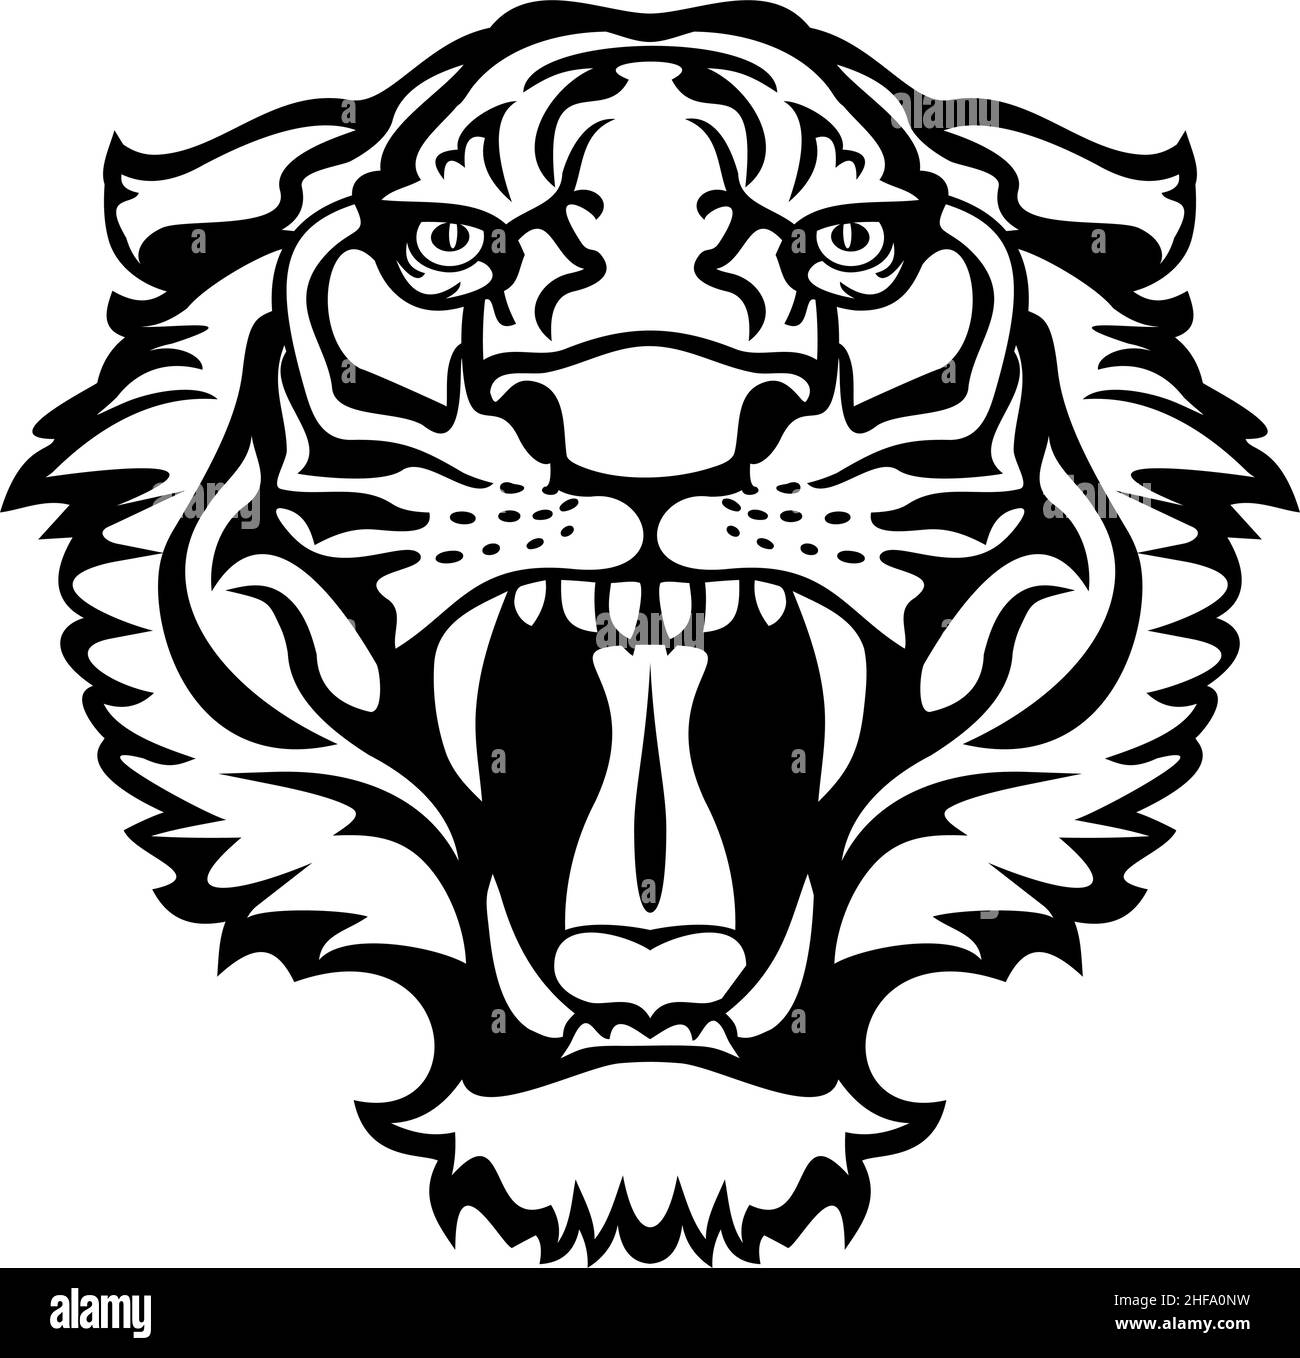 Roaring tiger angry face / black white silhouette Stock Vector